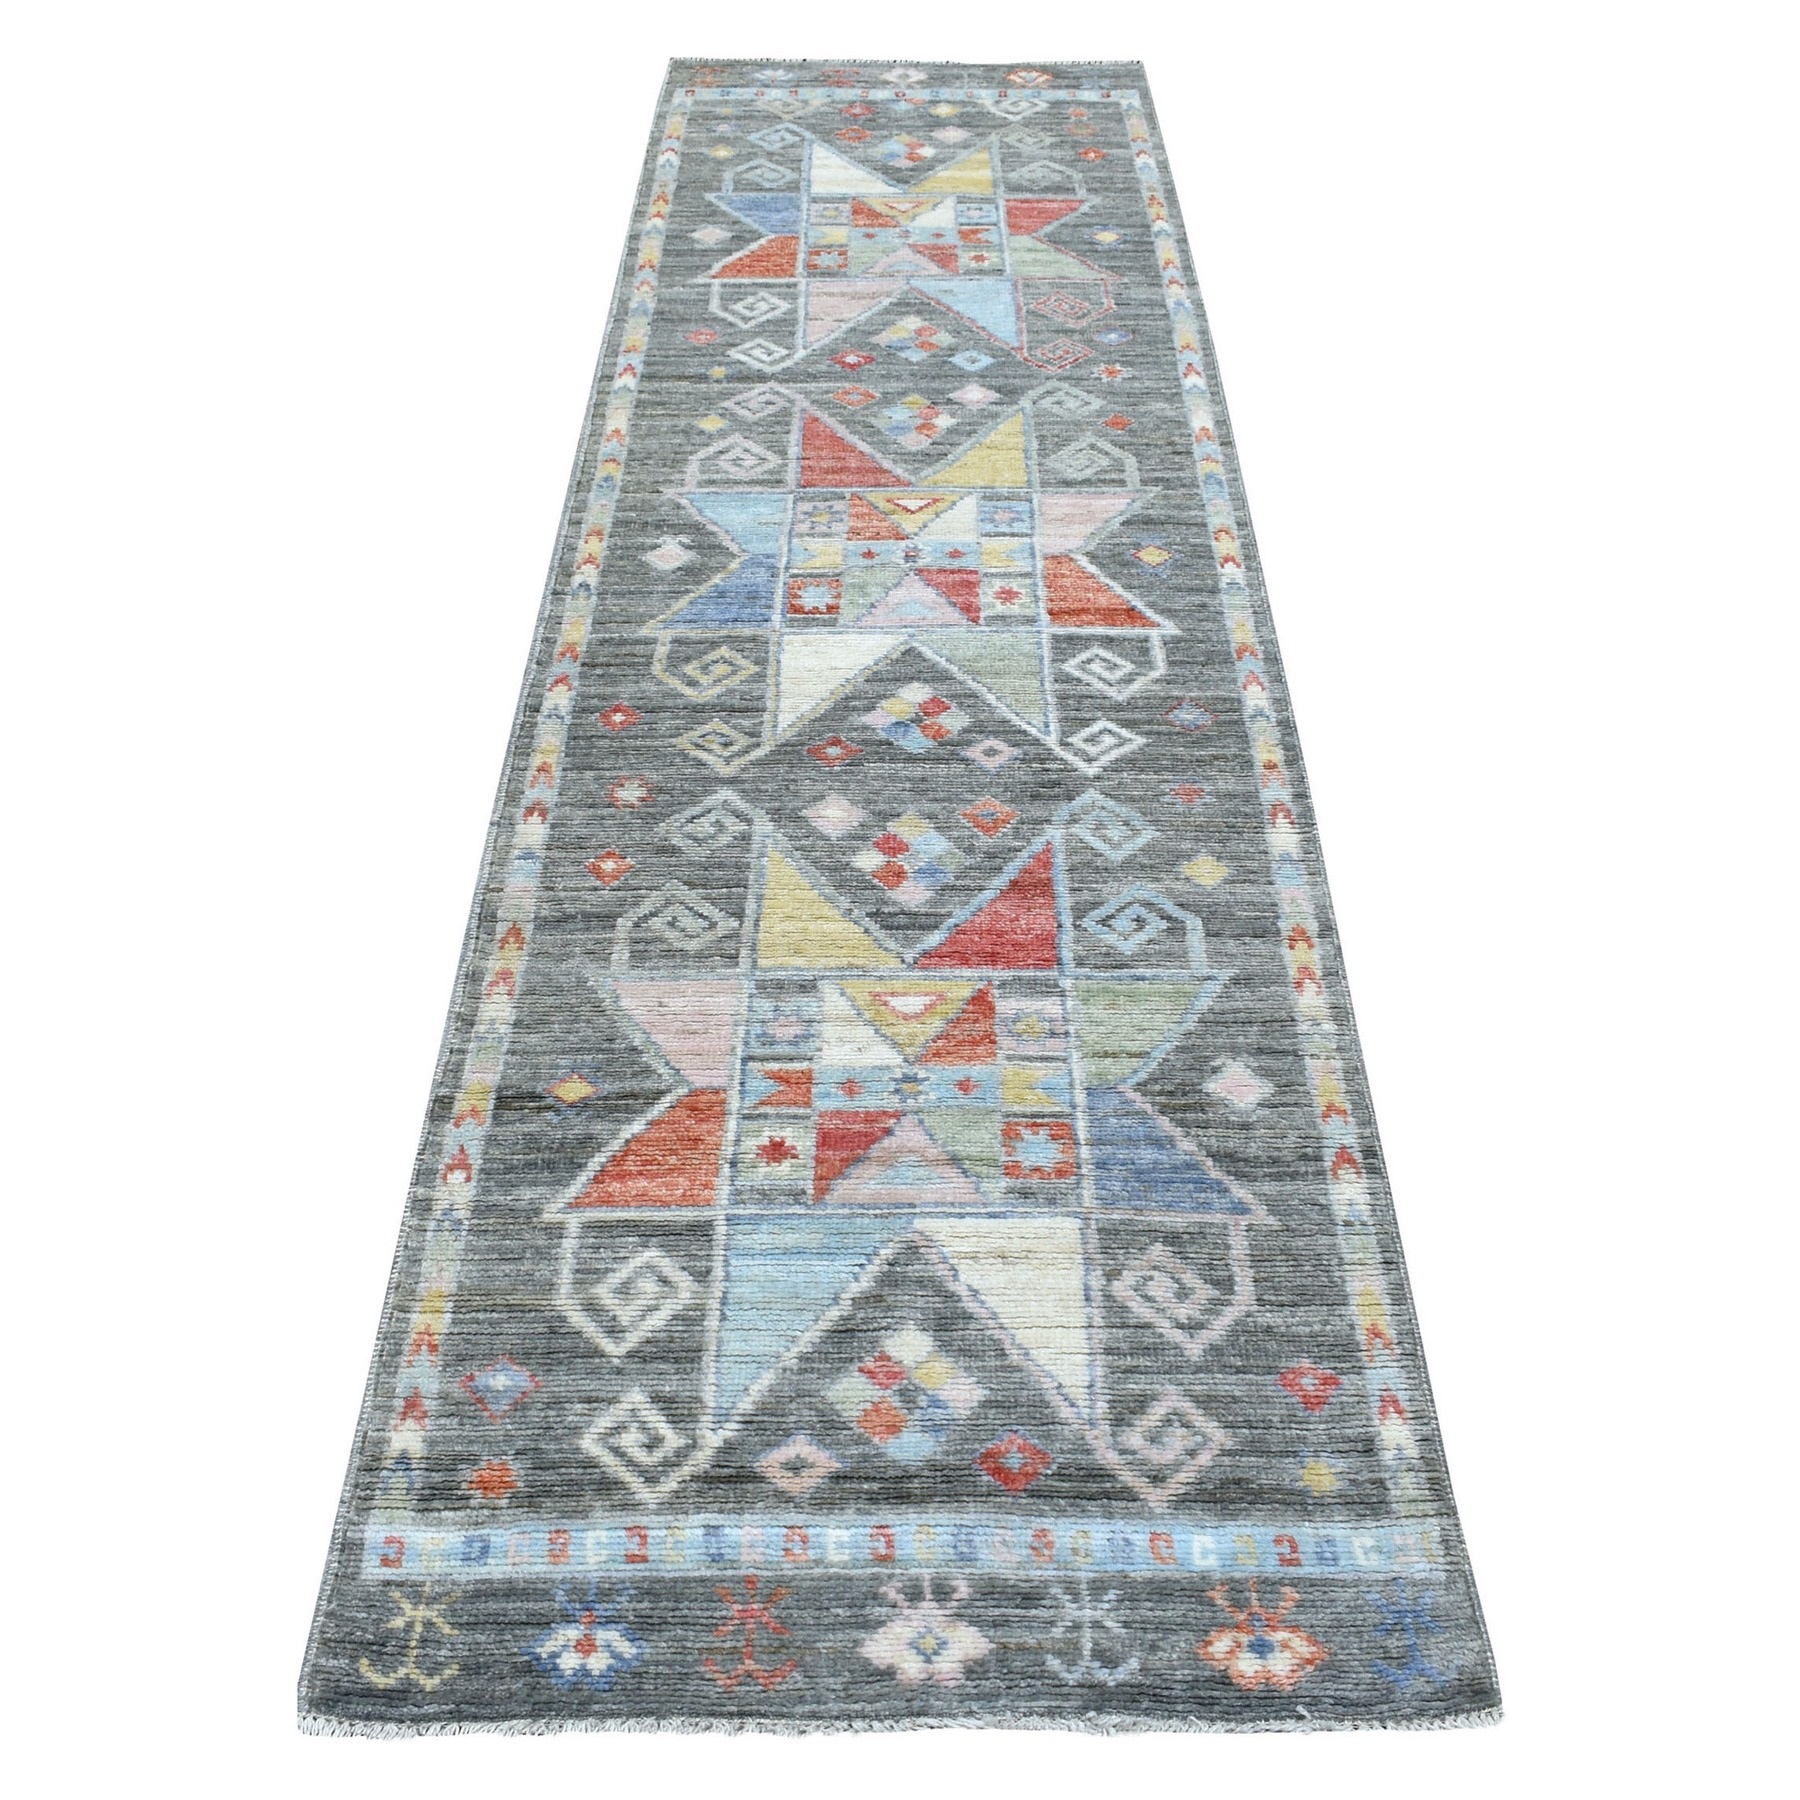 2'8"x9'7" Village Inspire Anatolian Colorful Star Design Soft Afghan Wool Hand Woven Oriental Runner Rug 